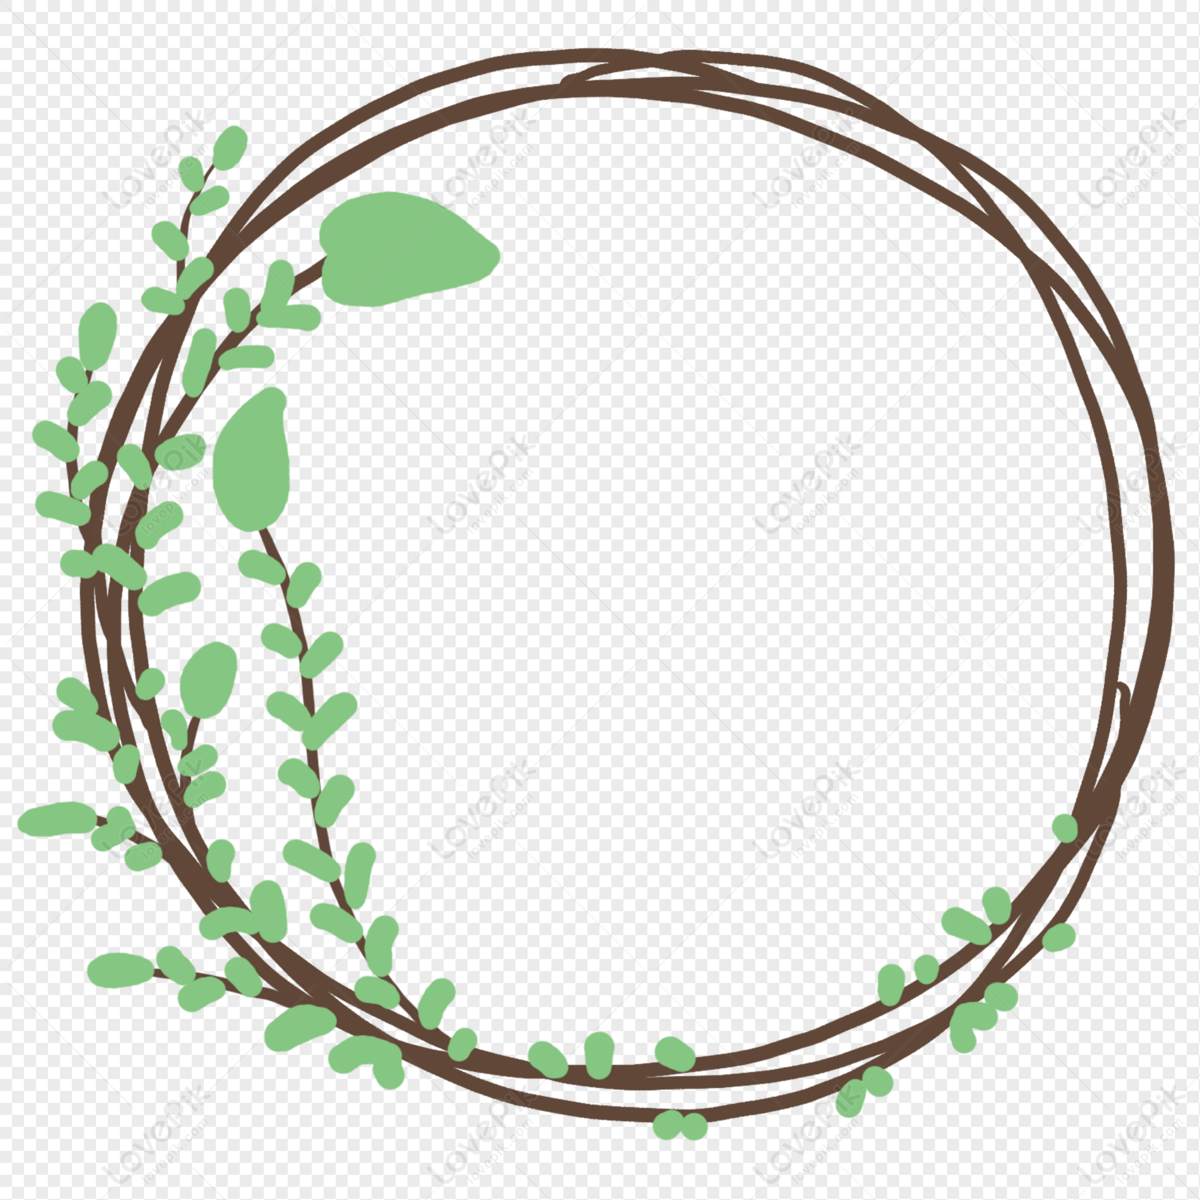 Hand drawn leaves vine border, material, hands leaves, leaves png image free download